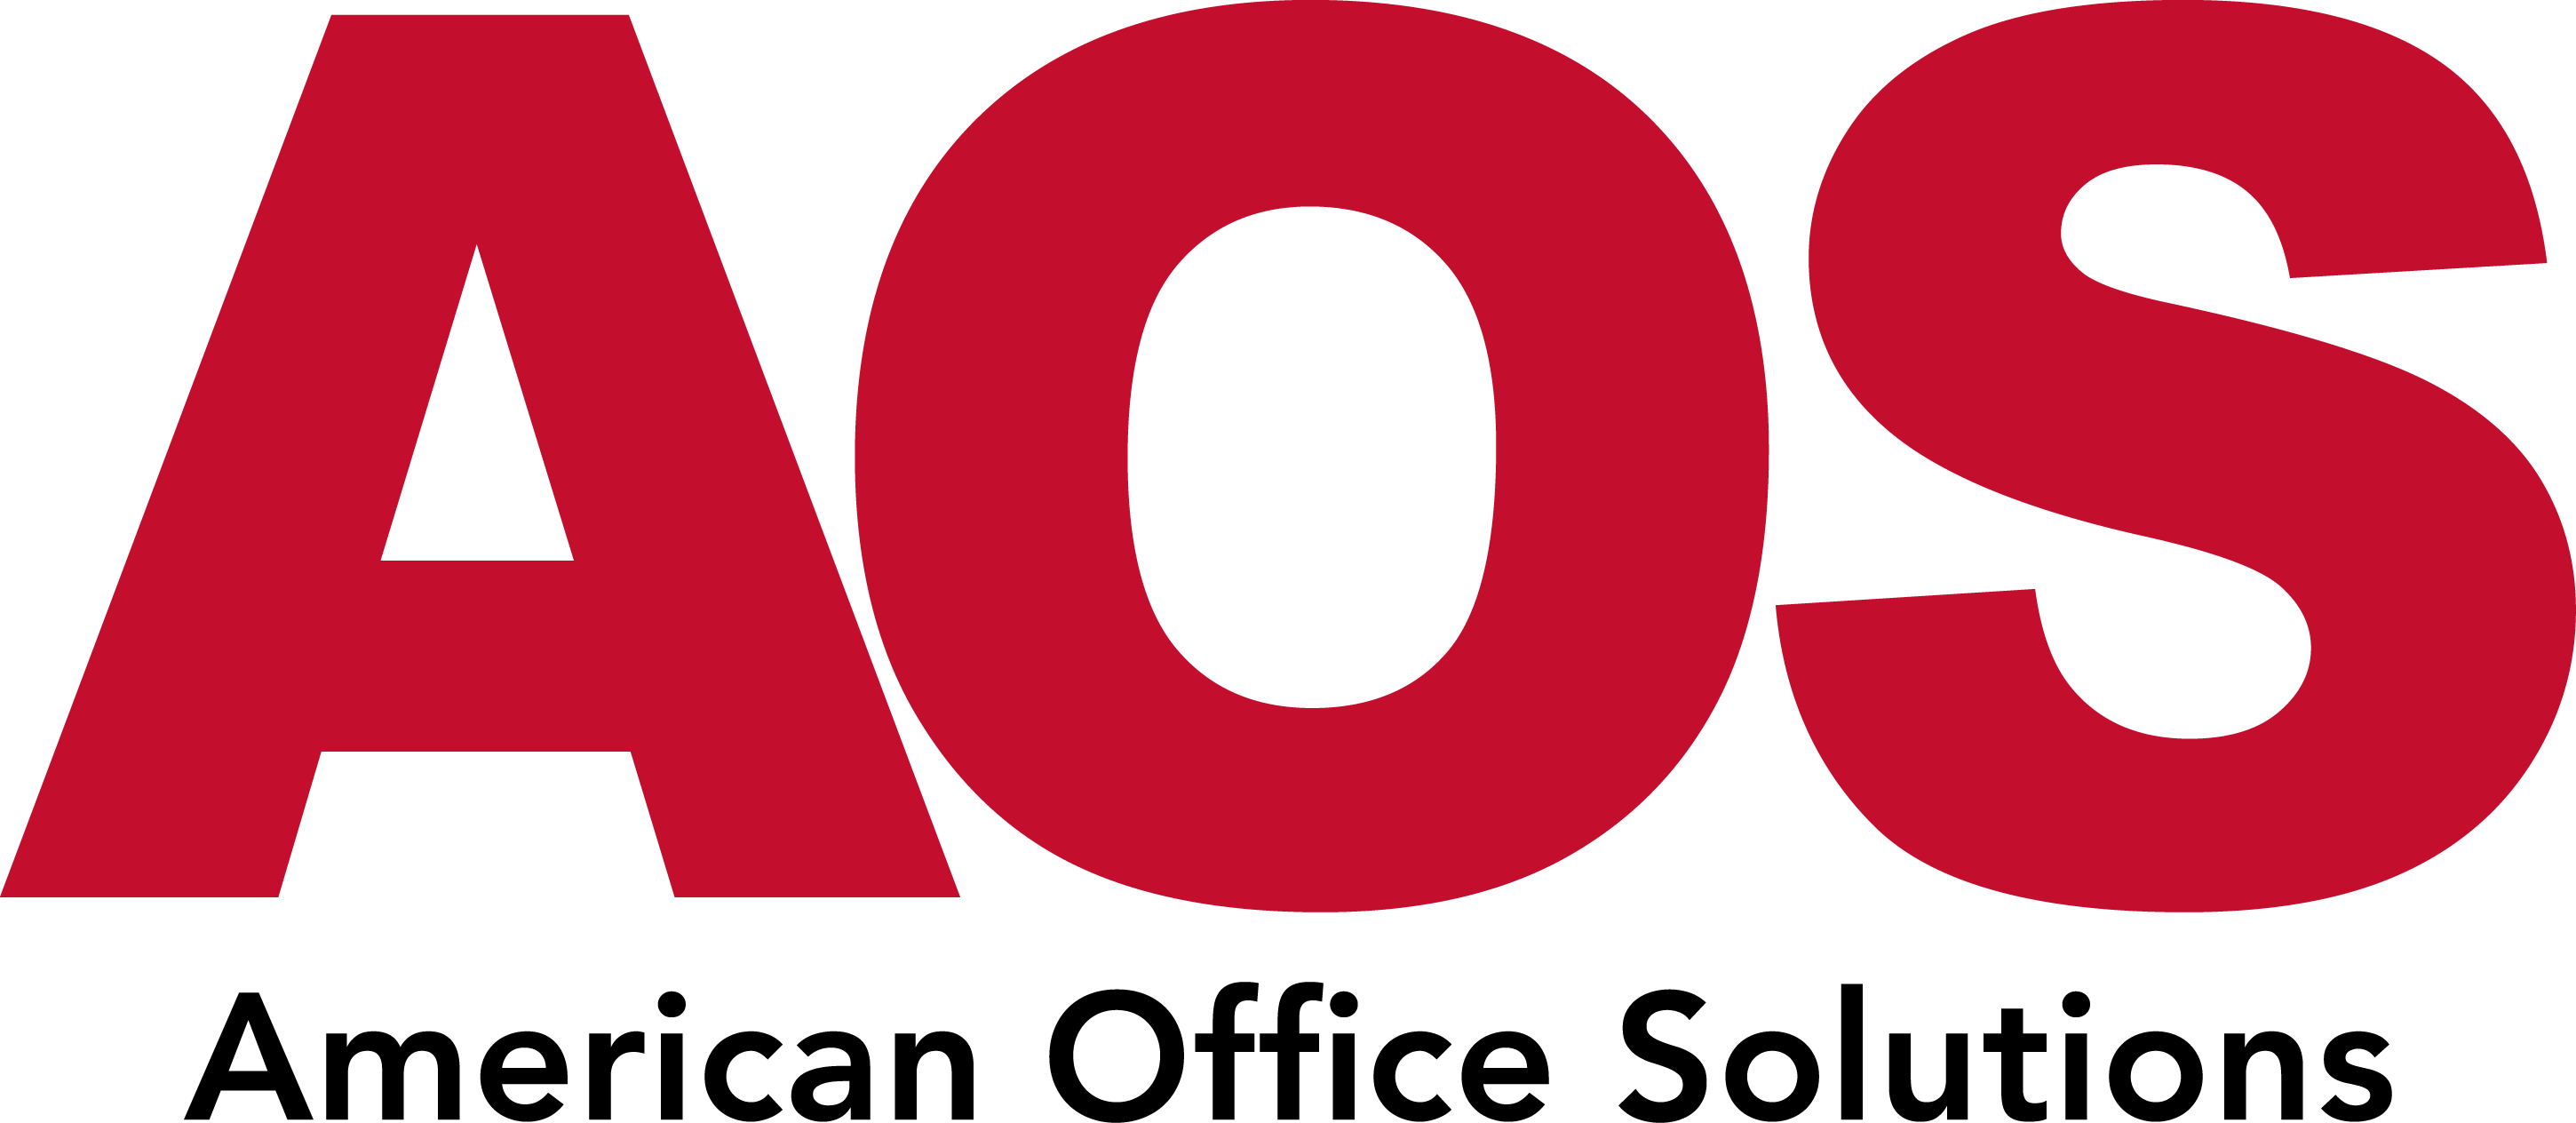 Sharp Copier Logo - Sharp Copiers and Printers - American Office Solutions